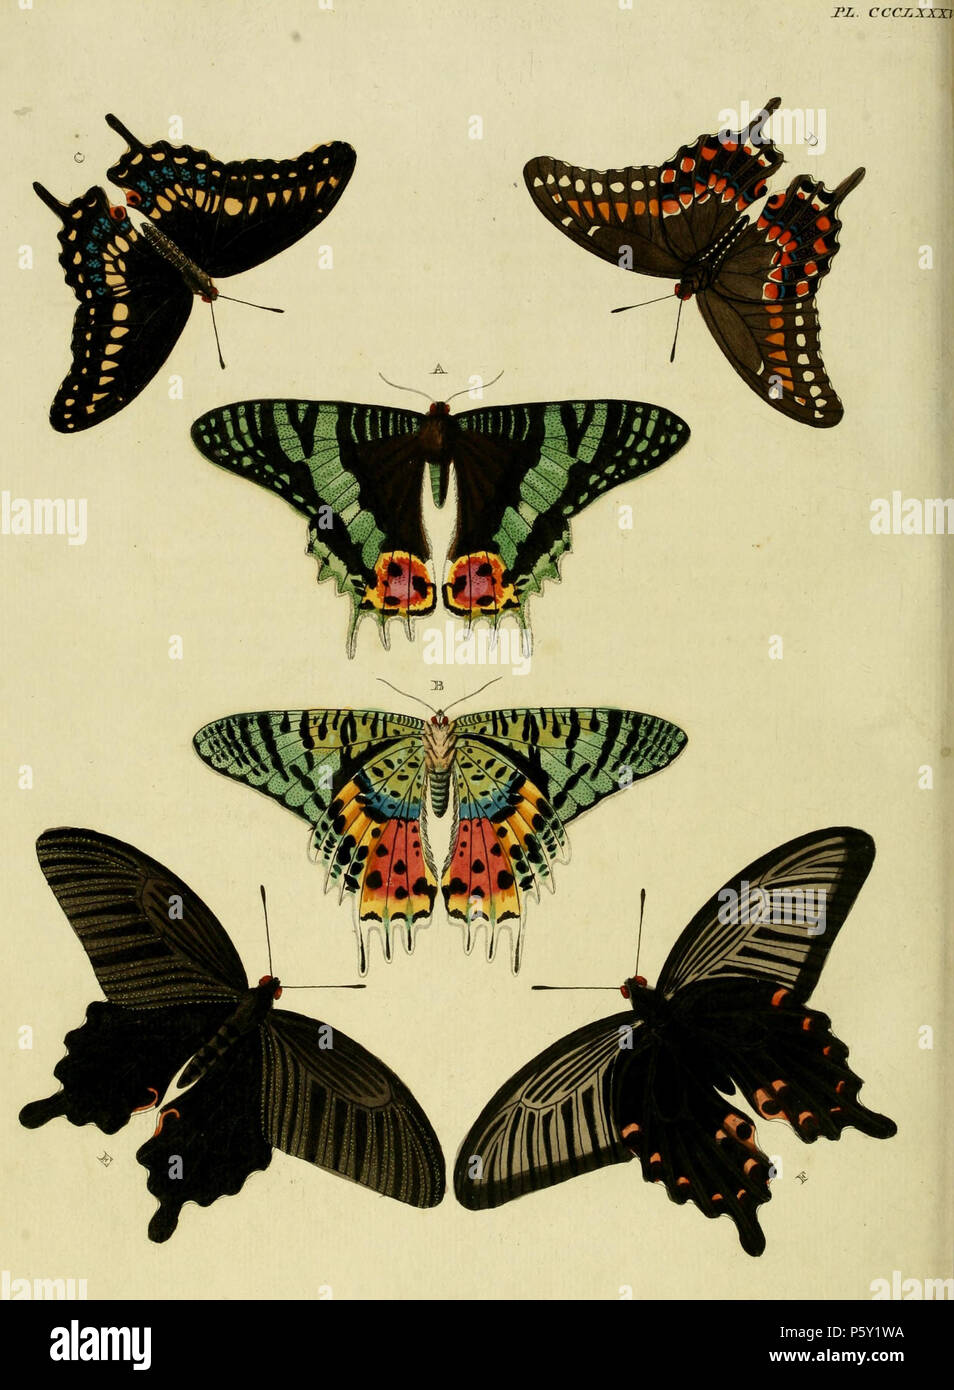 N/A. Plate CCCLXXXV Warning: some taxa/names may be misidentified/misapplied or placed in a different genus.  A, B: [Papilio] Rhipheus ( = Chrysiridia riphearia Hübner, [1823], see Funet.  C, D: [Papilio] Asterius ( = Papilio polyxenes asterius Stoll, 1782, see Funet). Photos at Butterflies of America.  E, F: [Papilio] Demetrius ( = Papilio protenor demetrius Stoll, [1782], see Funet).  Also on pl. 49 A as [Papilio] Protenor'.  . 1779. Pieter Cramer (1721 - 1776) and Caspar Stoll (between 1725 and 1730 - 1791) 390 CramerAndStoll-uitlandsche kapellen vol. 4- pl 385 Stock Photo